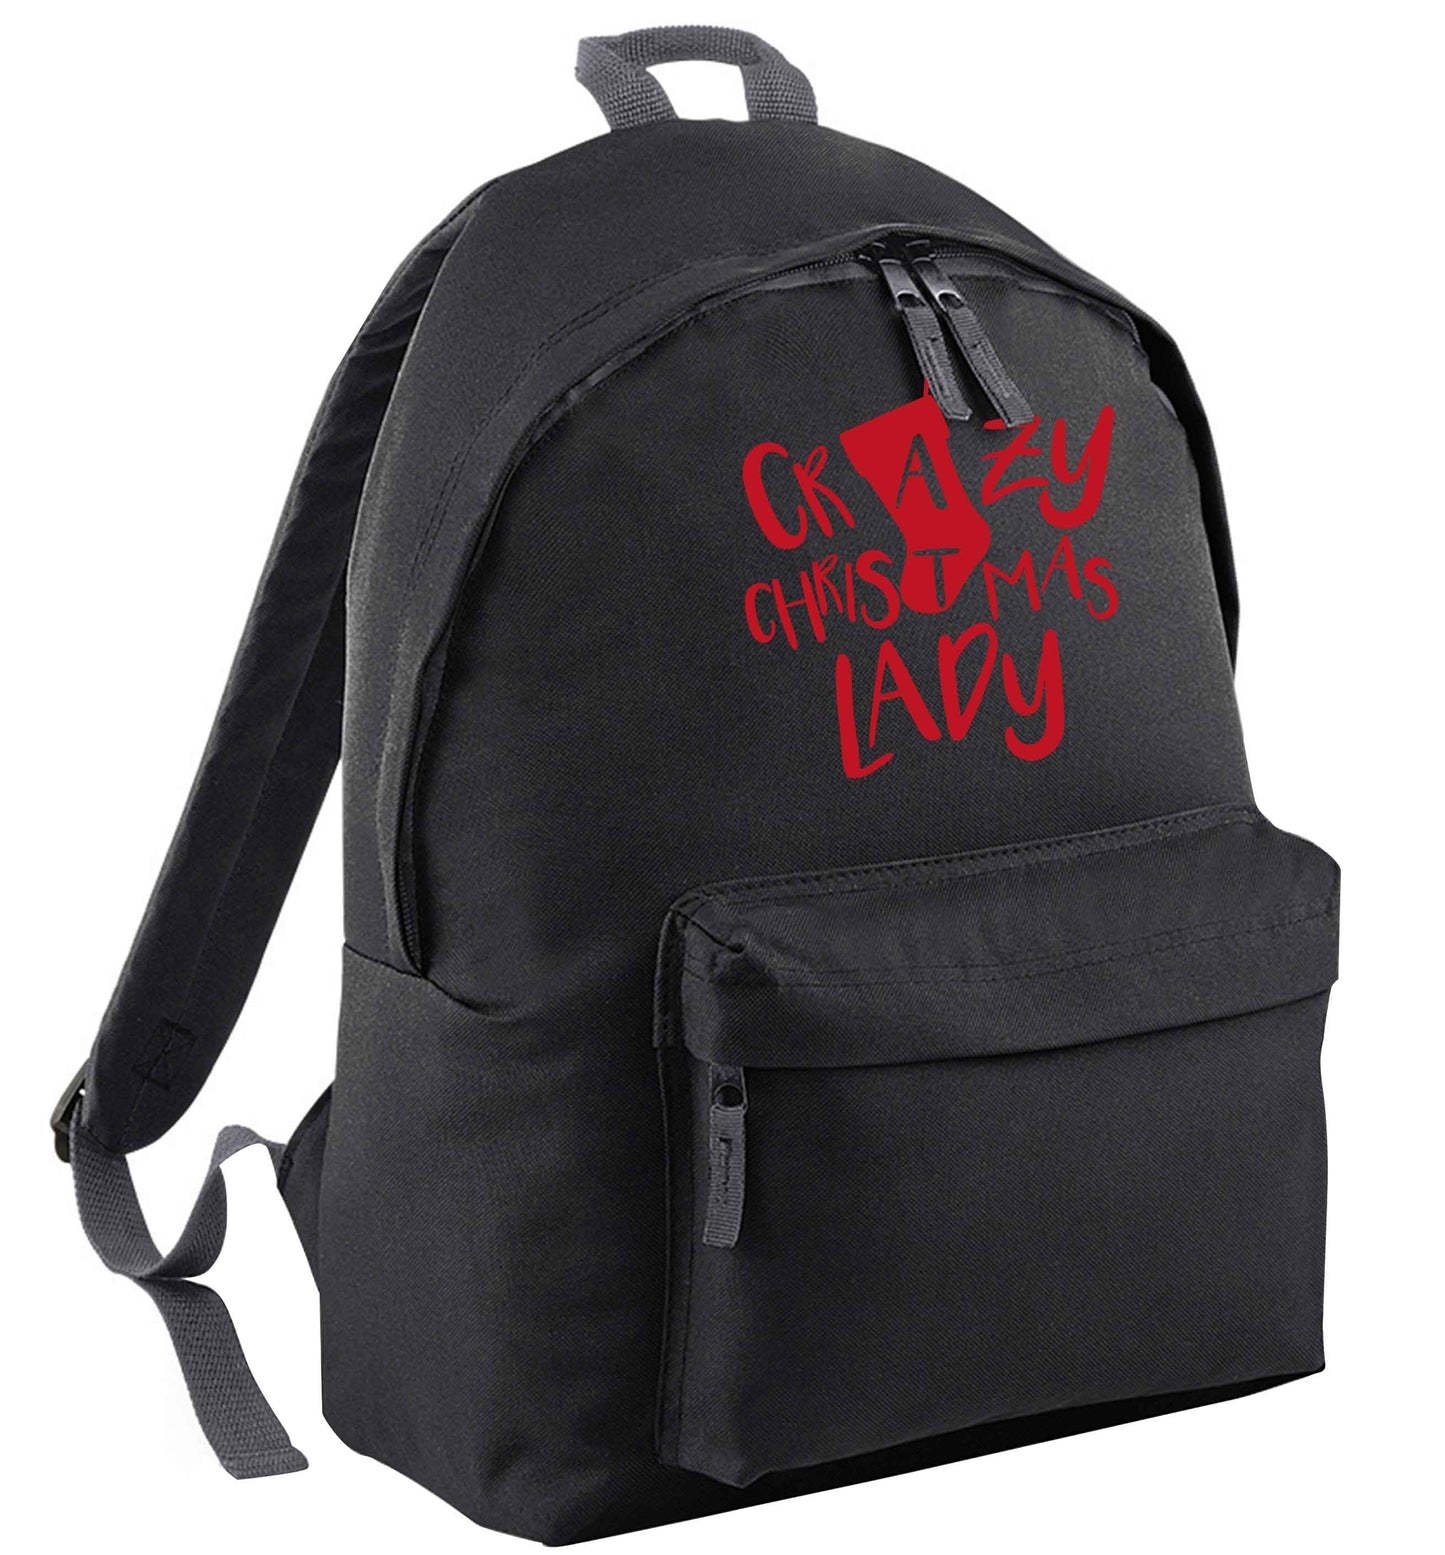 Crazy Christmas Dude black adults backpack